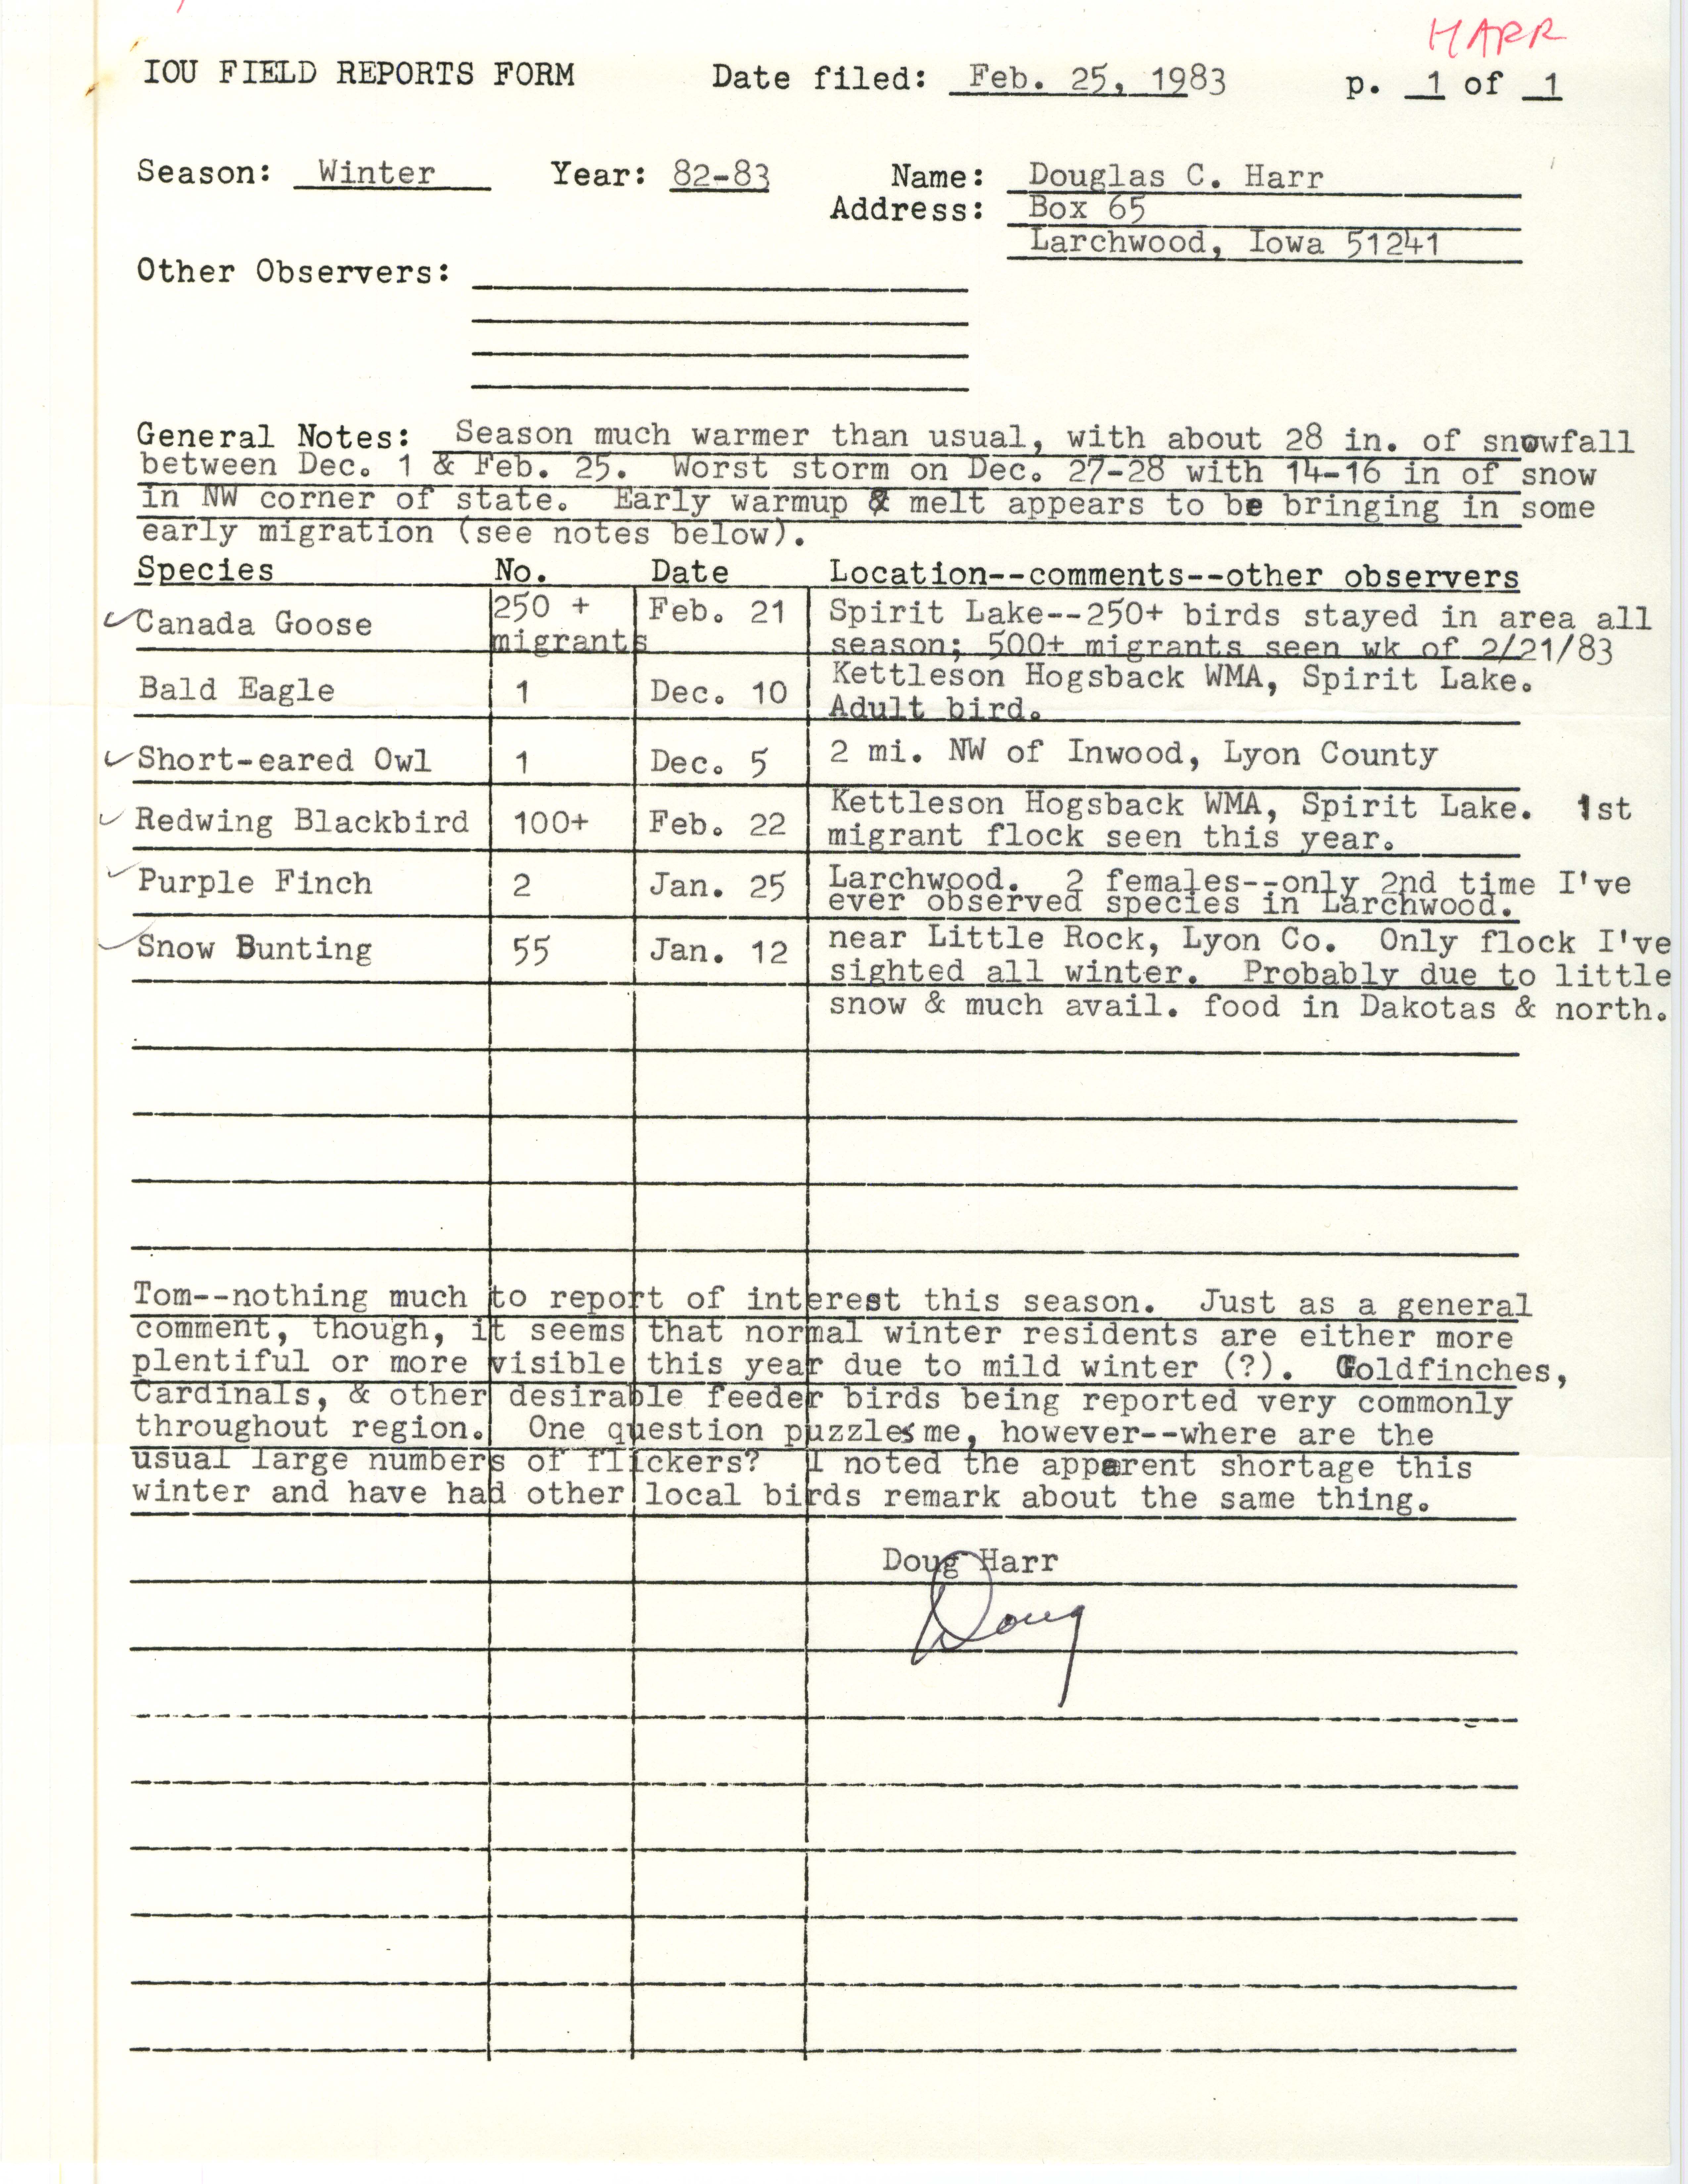 Field notes contributed by Douglas C. Harr, February 25, 1983